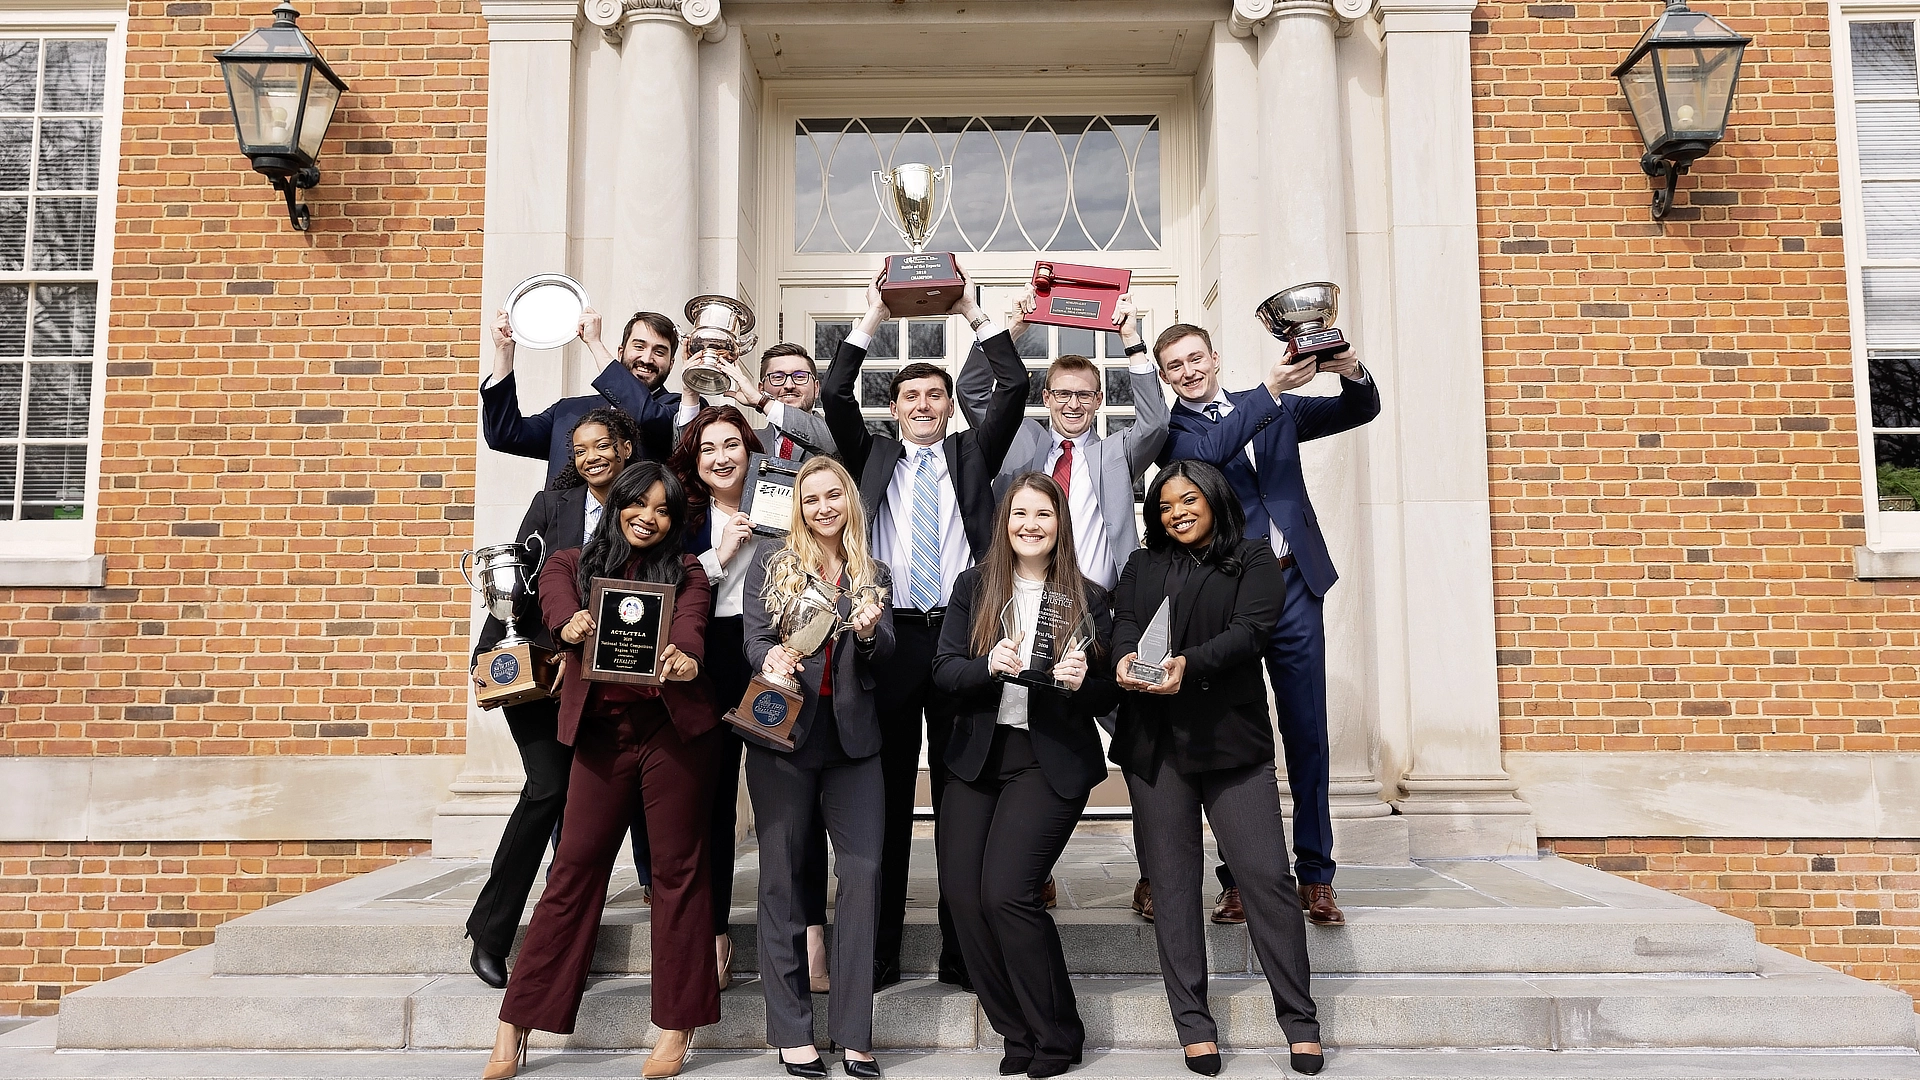 trial advocacy team with trophies